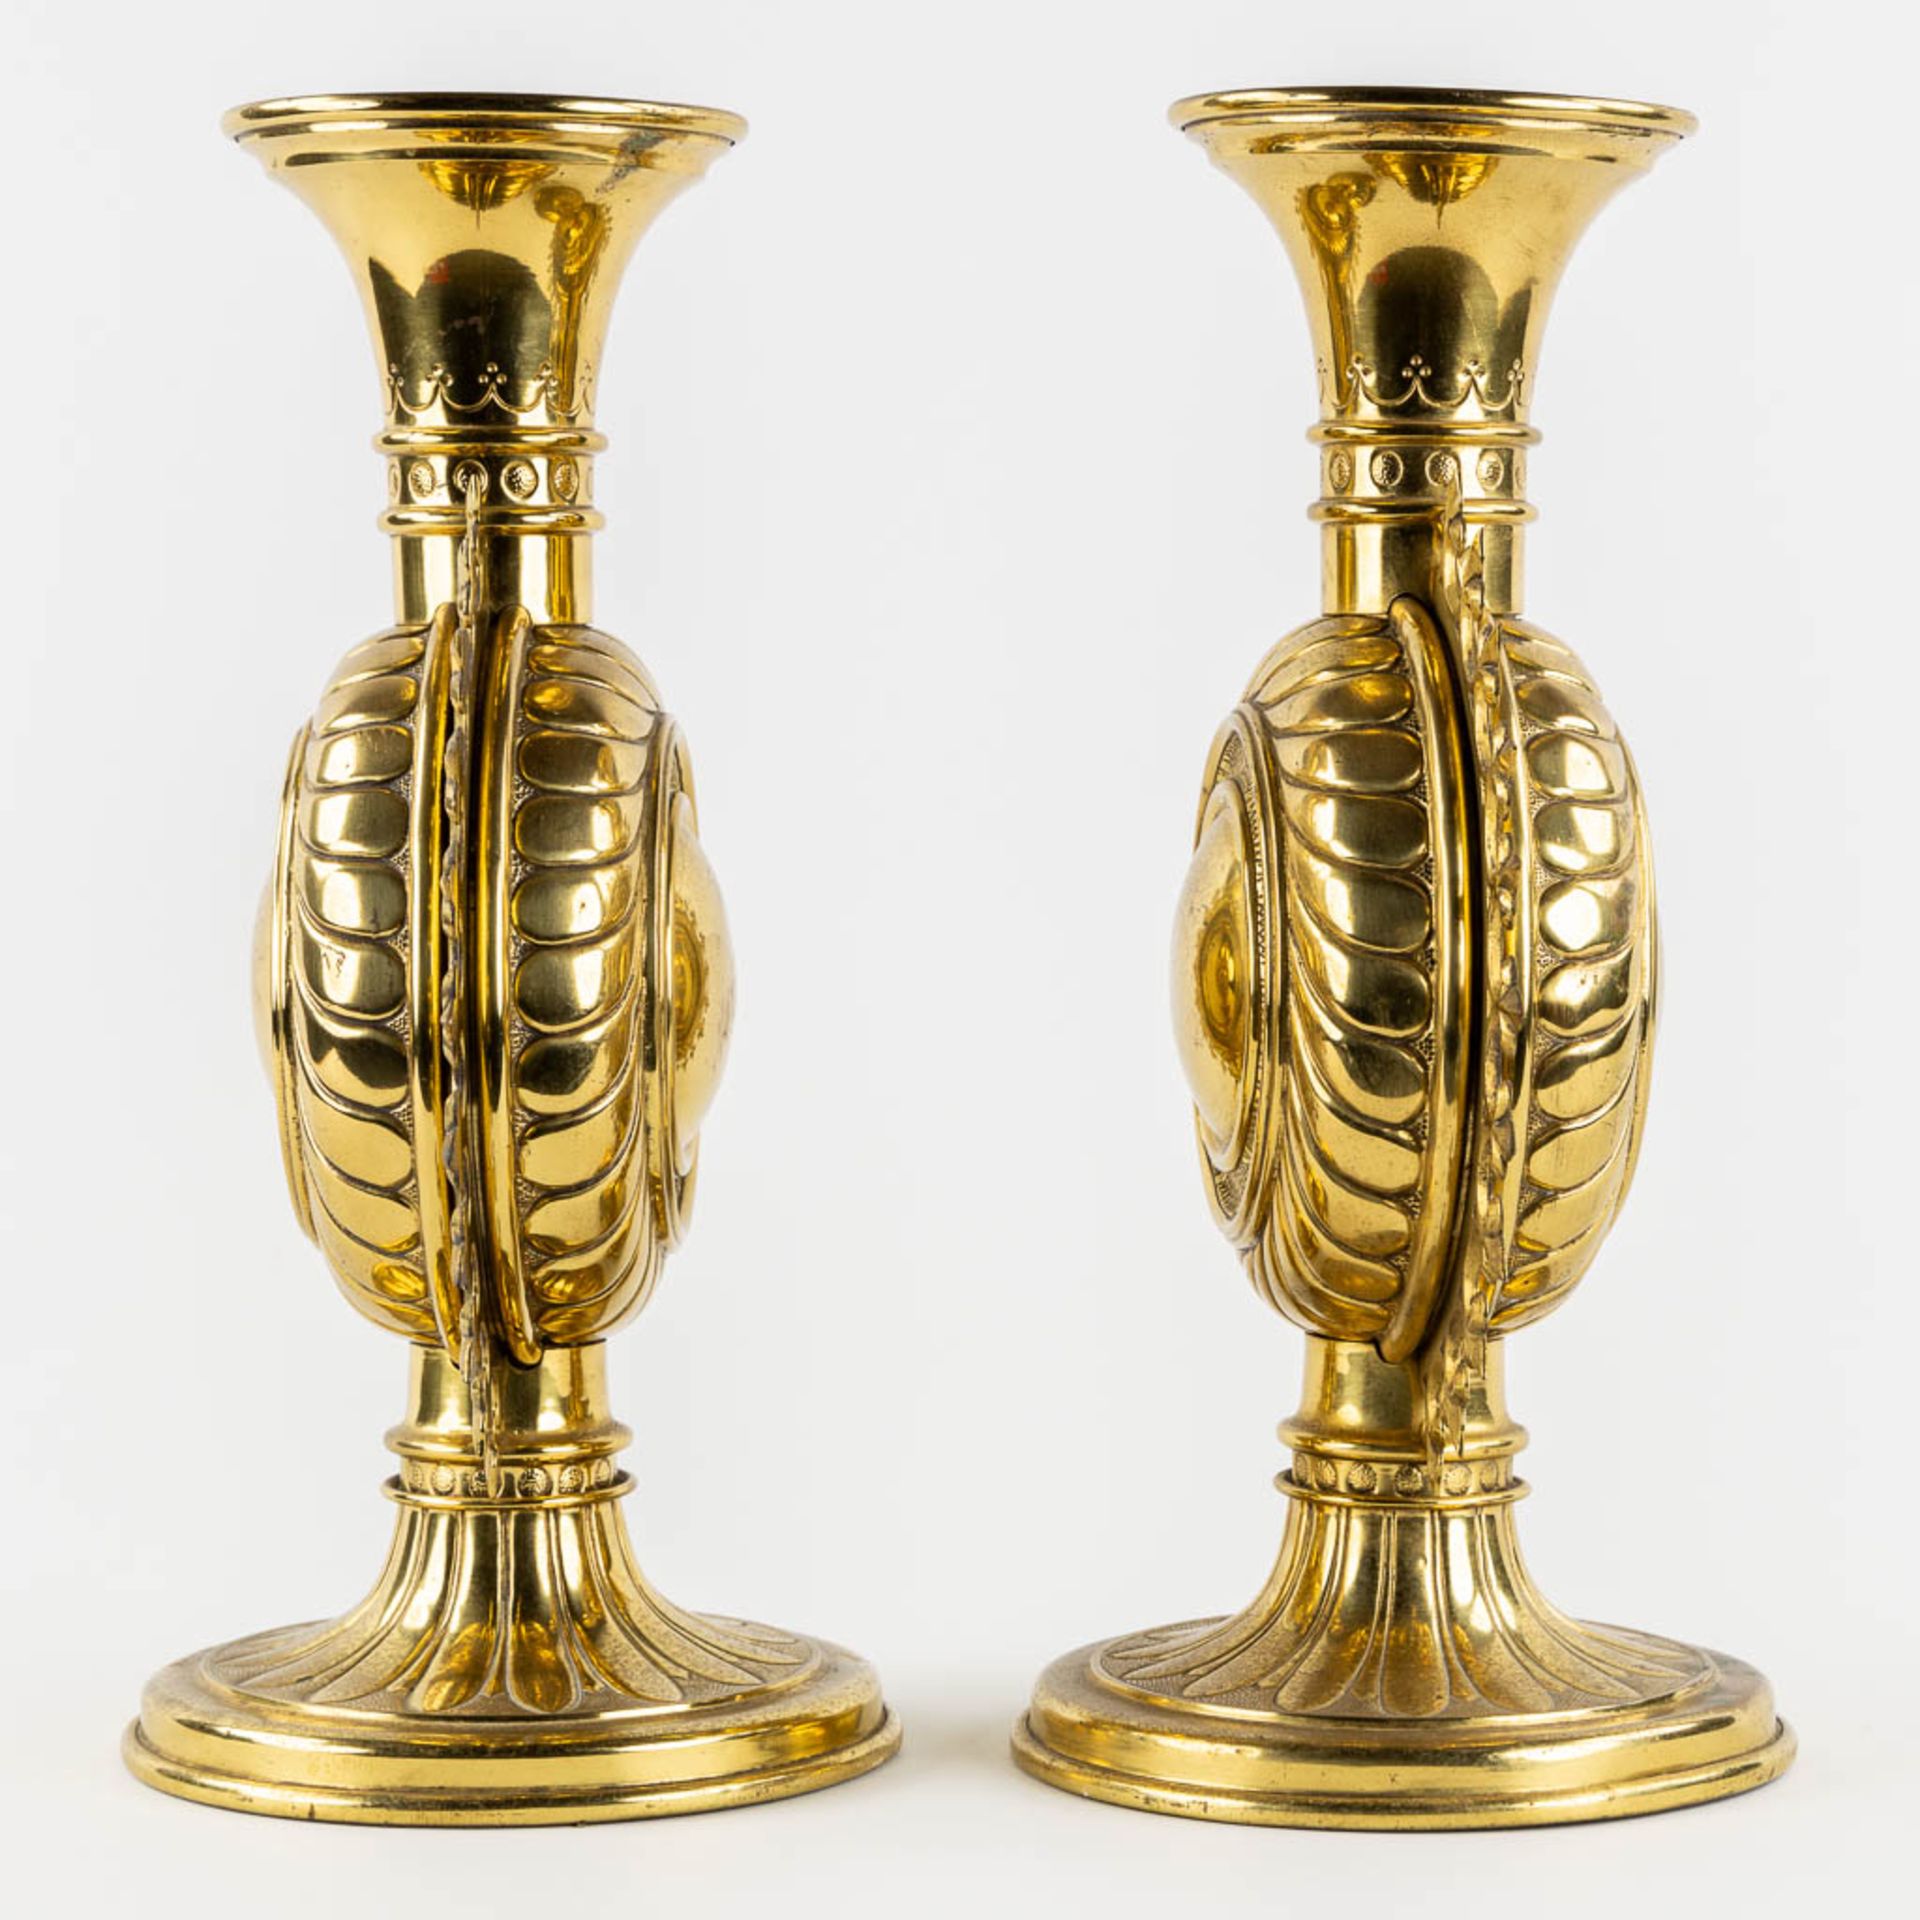 A pair of candelabra, brass, gothic Revival. (L:21 x W:27 x H:42 cm) - Image 6 of 11